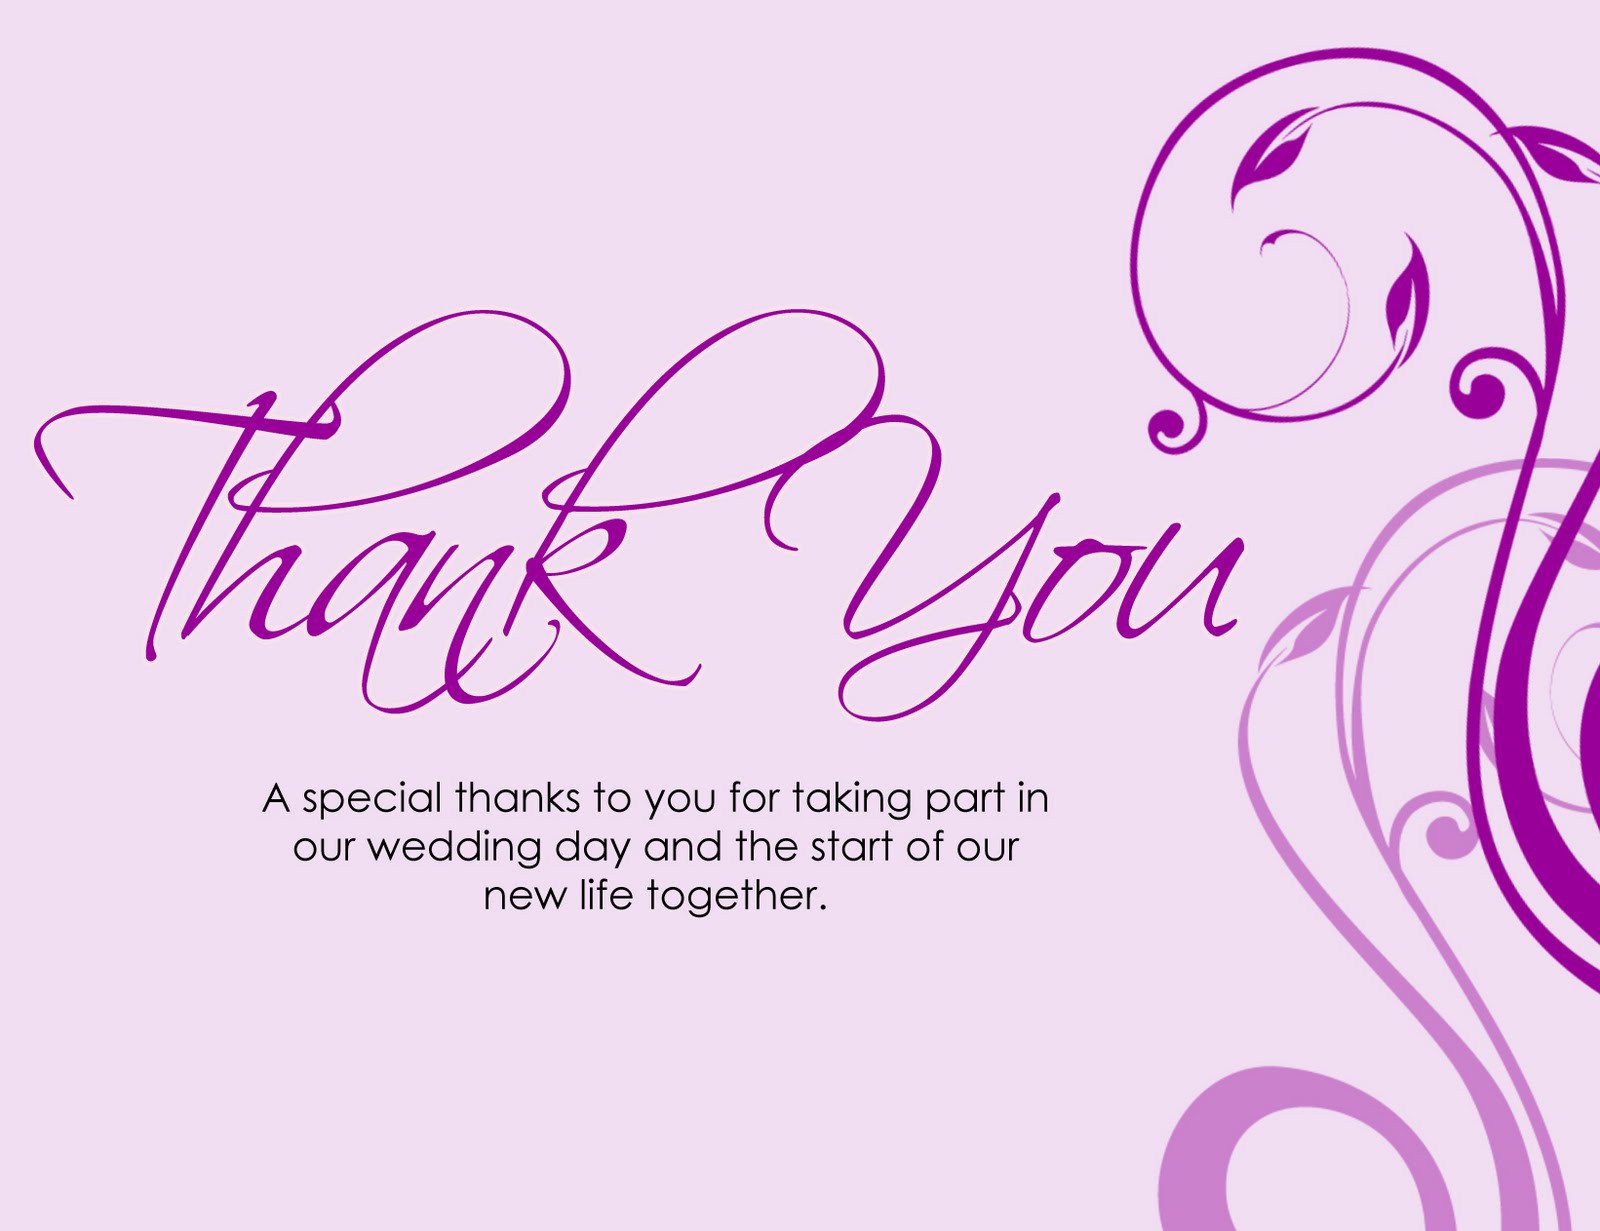 Special thanks to. Wedding thank you Card. Thank you Words. Wedding Day картинки. Thank u Card.